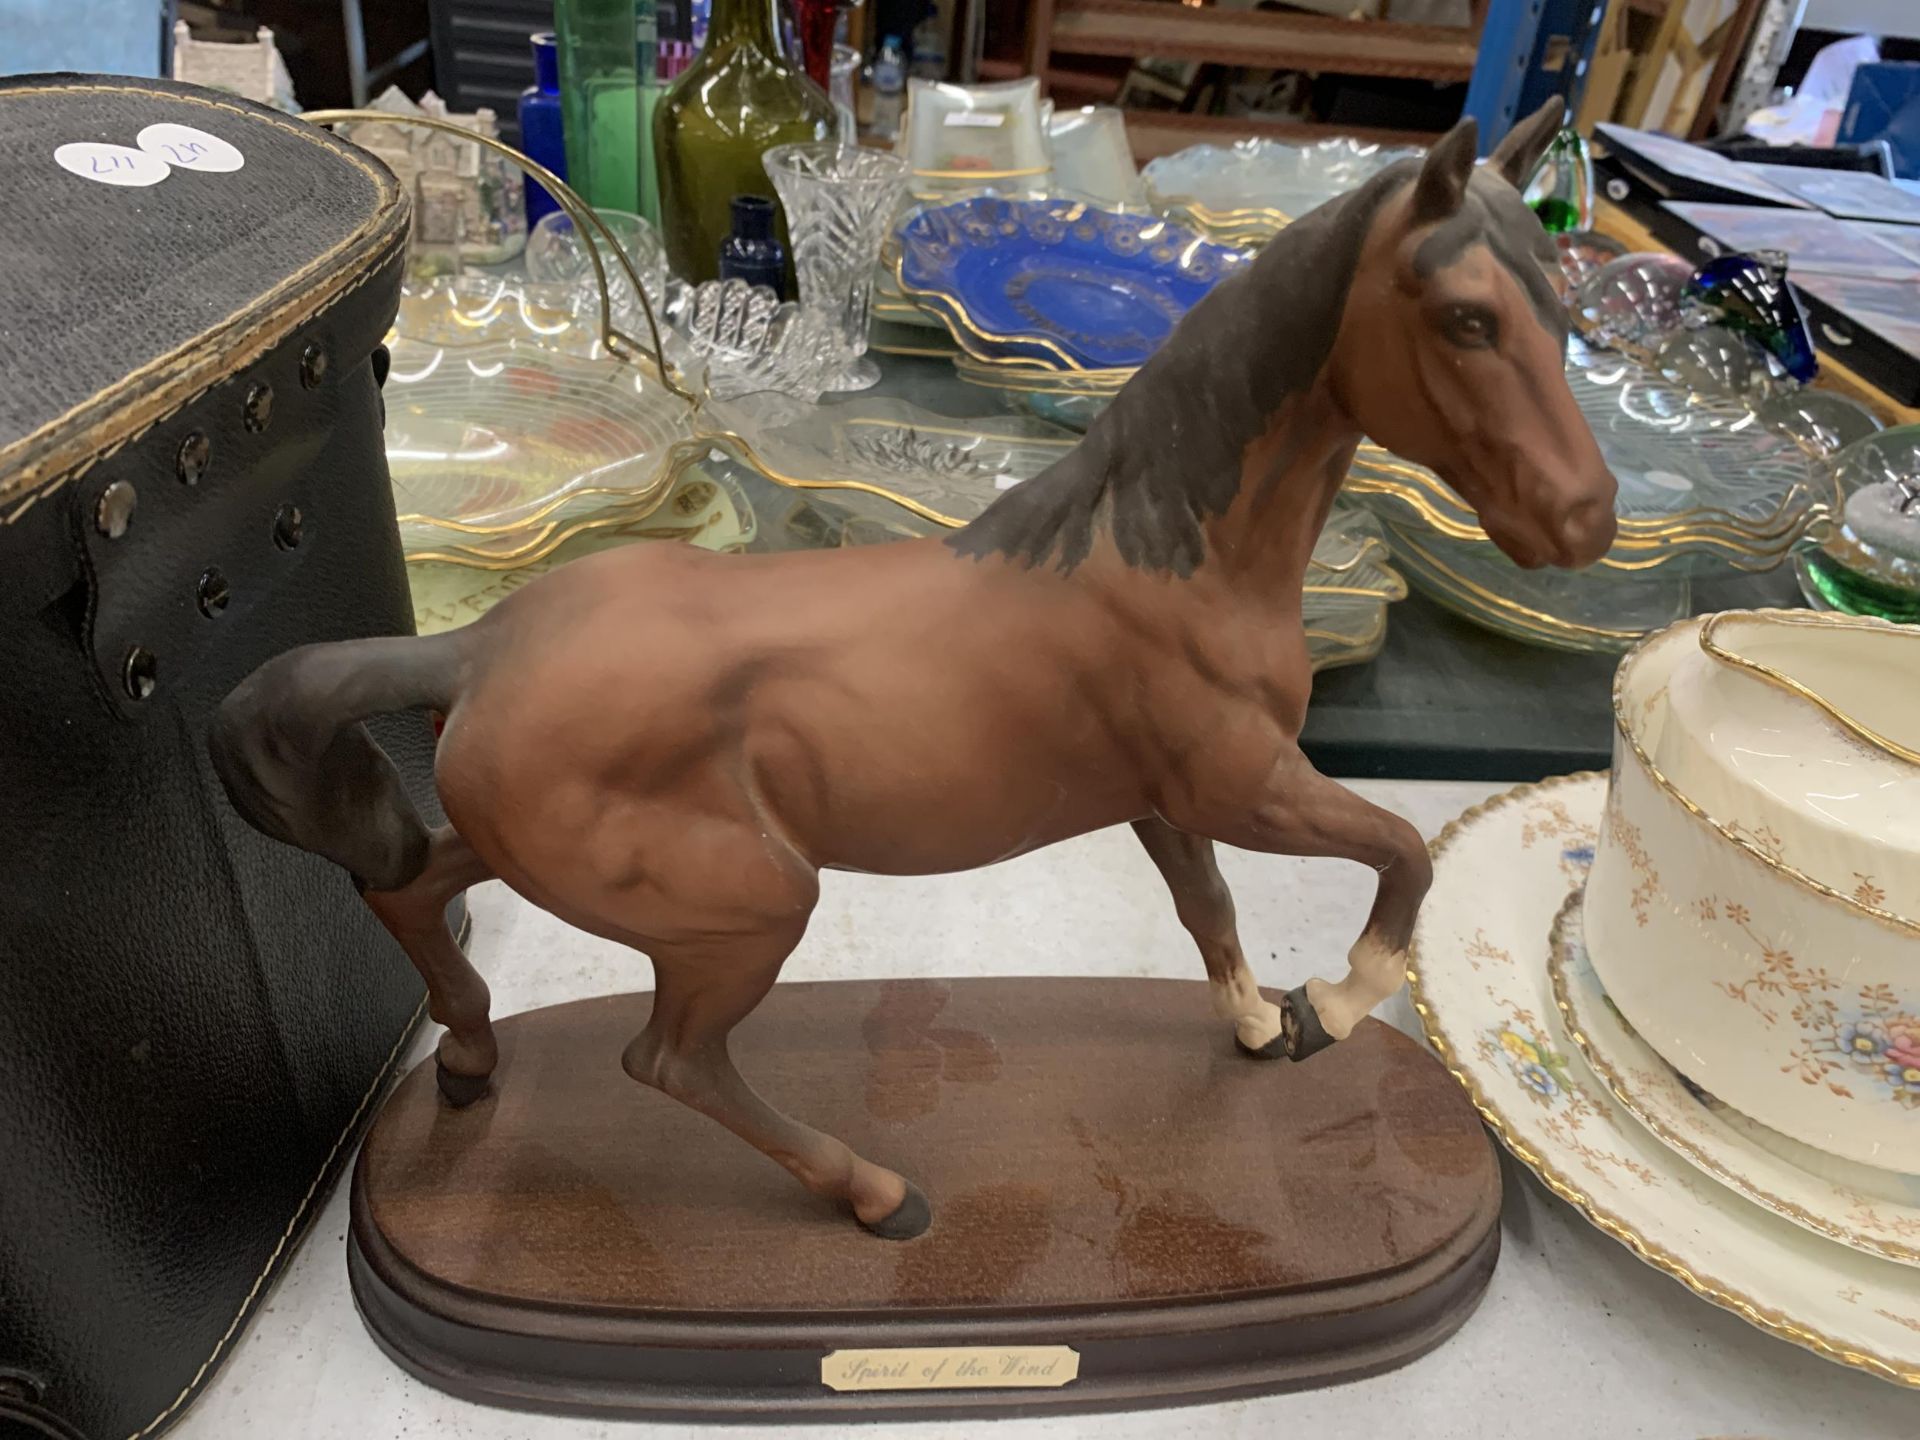 TWO HORSE RELATED ITEMS - RESIN HORSE AND JOCKEY AND A SPIRIT OF THE WIND EXAMPLE ON WOODEN PLINTH - Image 4 of 5